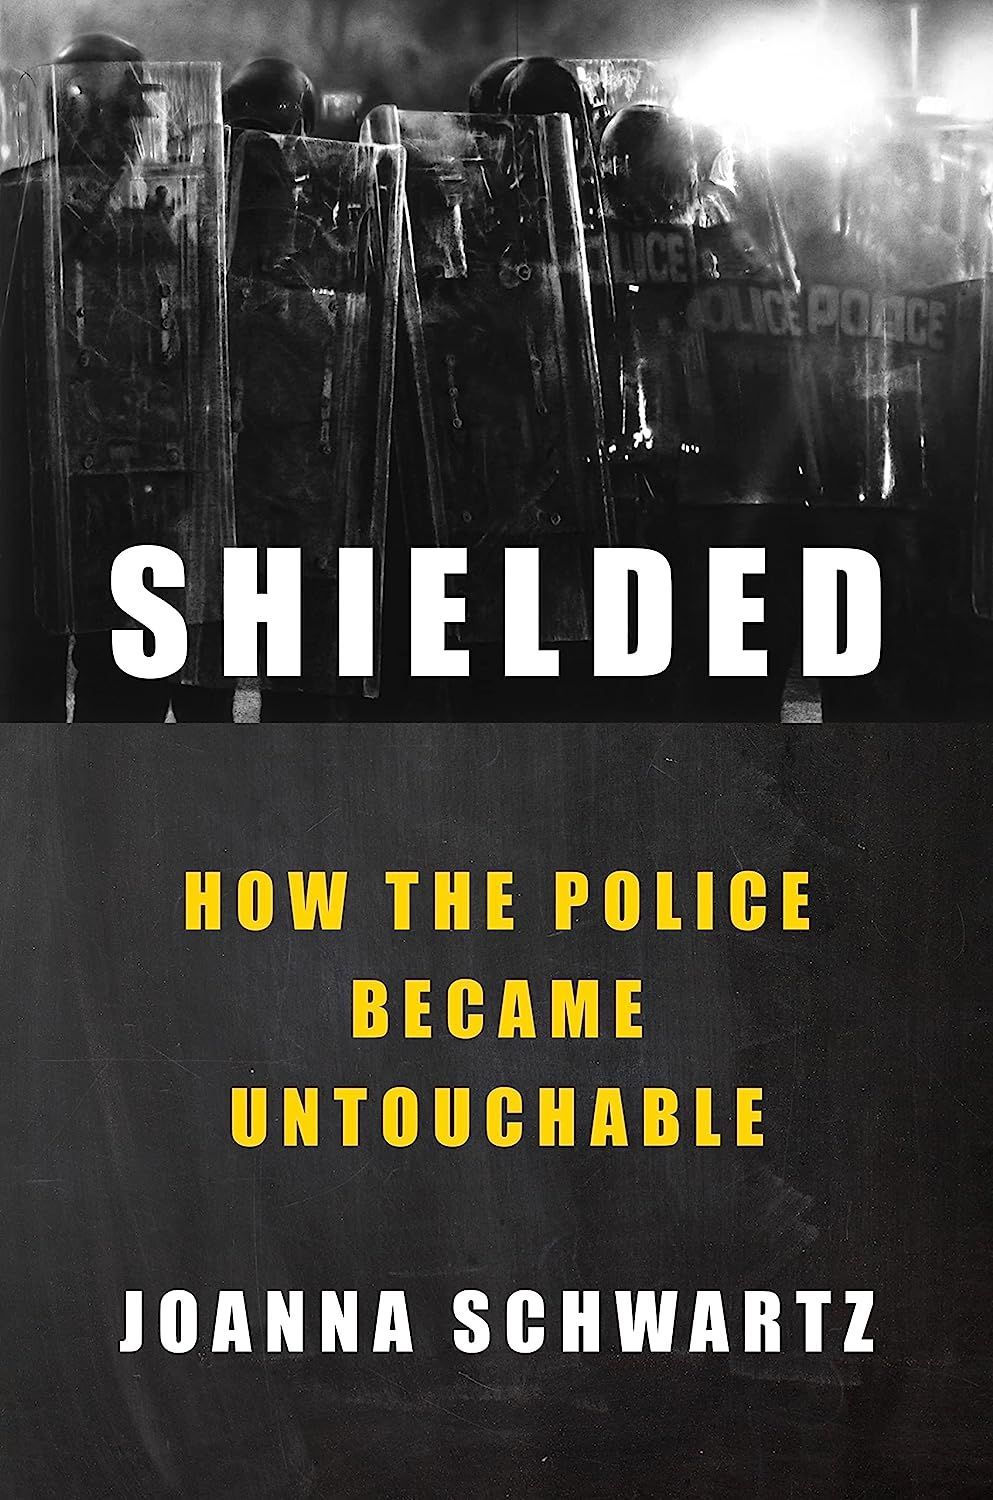 Justice in the Age of Abolition: On Joanna Schwartz’s “Shielded”